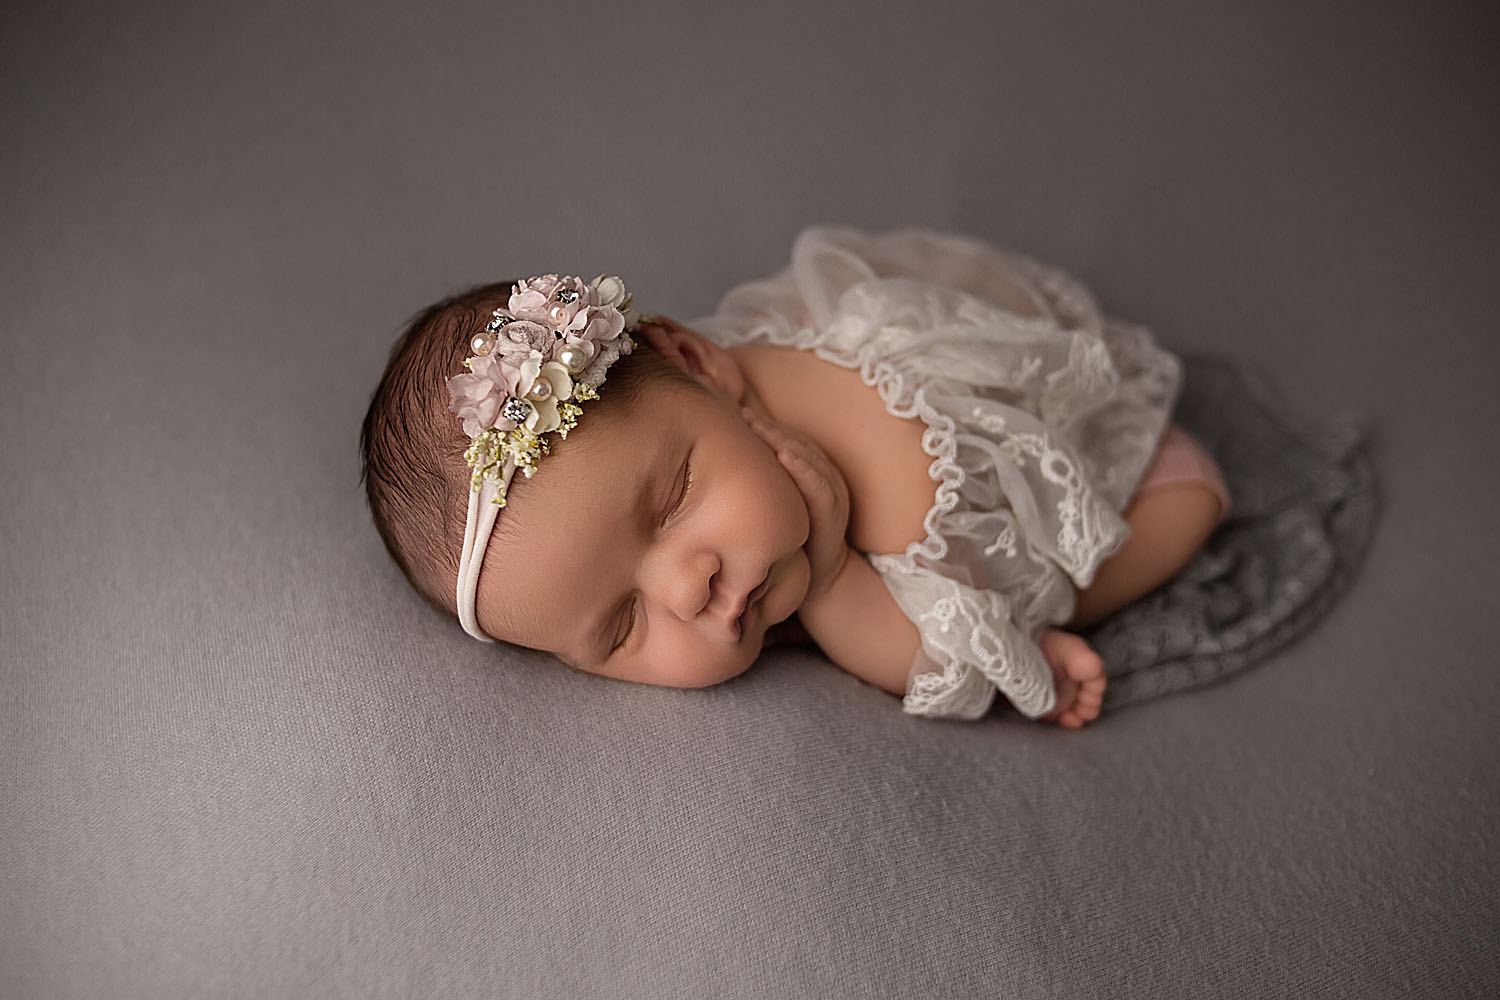 newborn photoshoot of baby on gray fabric in pembroke pines, fl